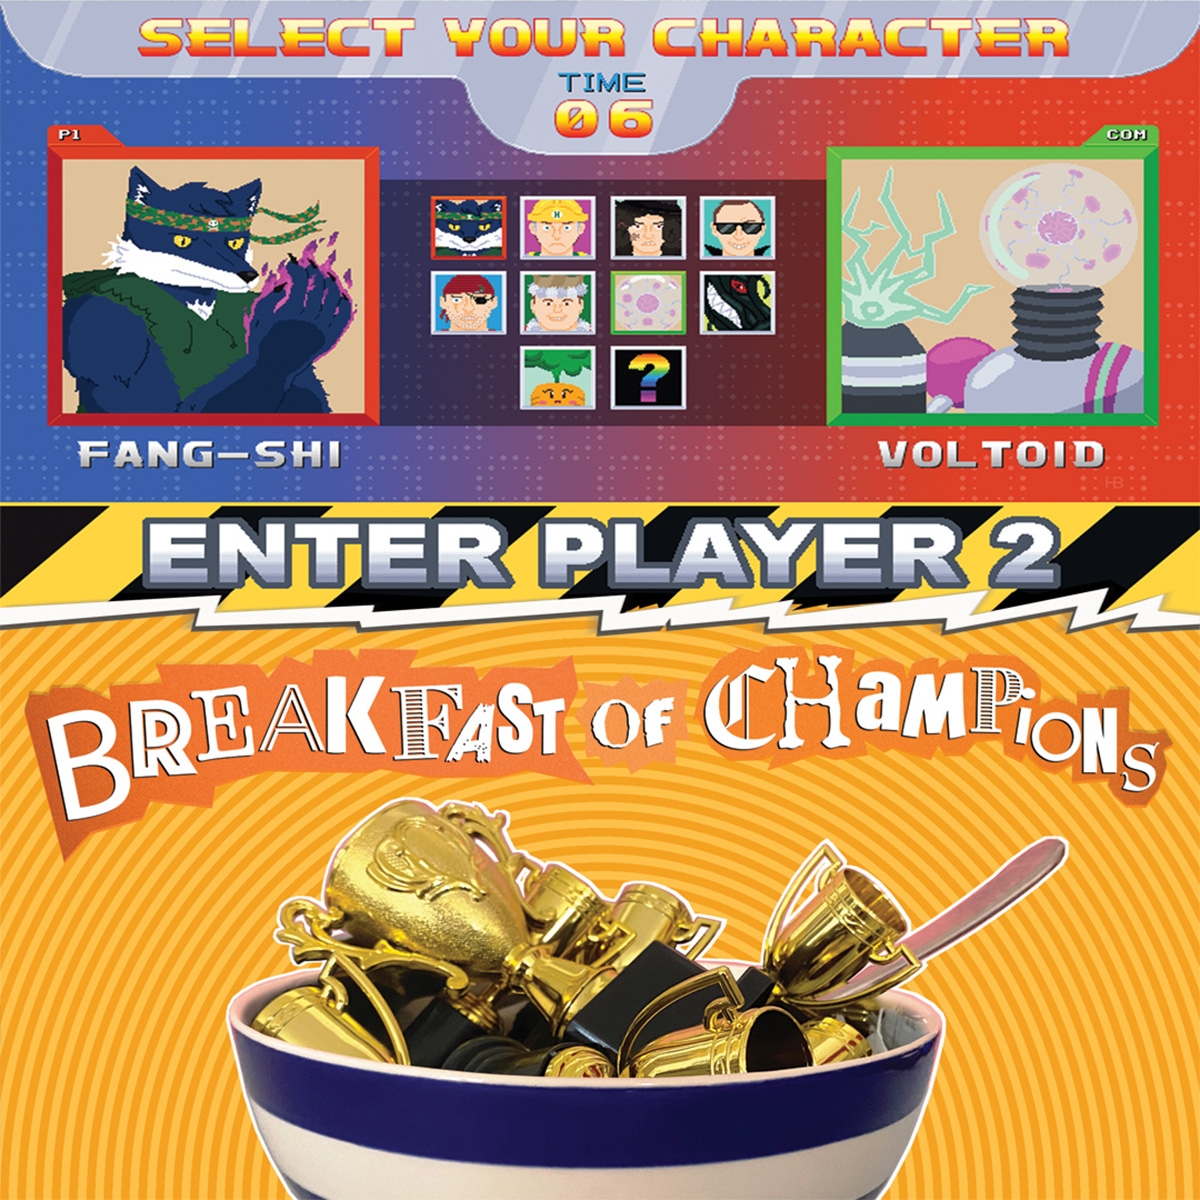 Breakfast Of Champions and Enter Player 2 - MissImp @ NCF